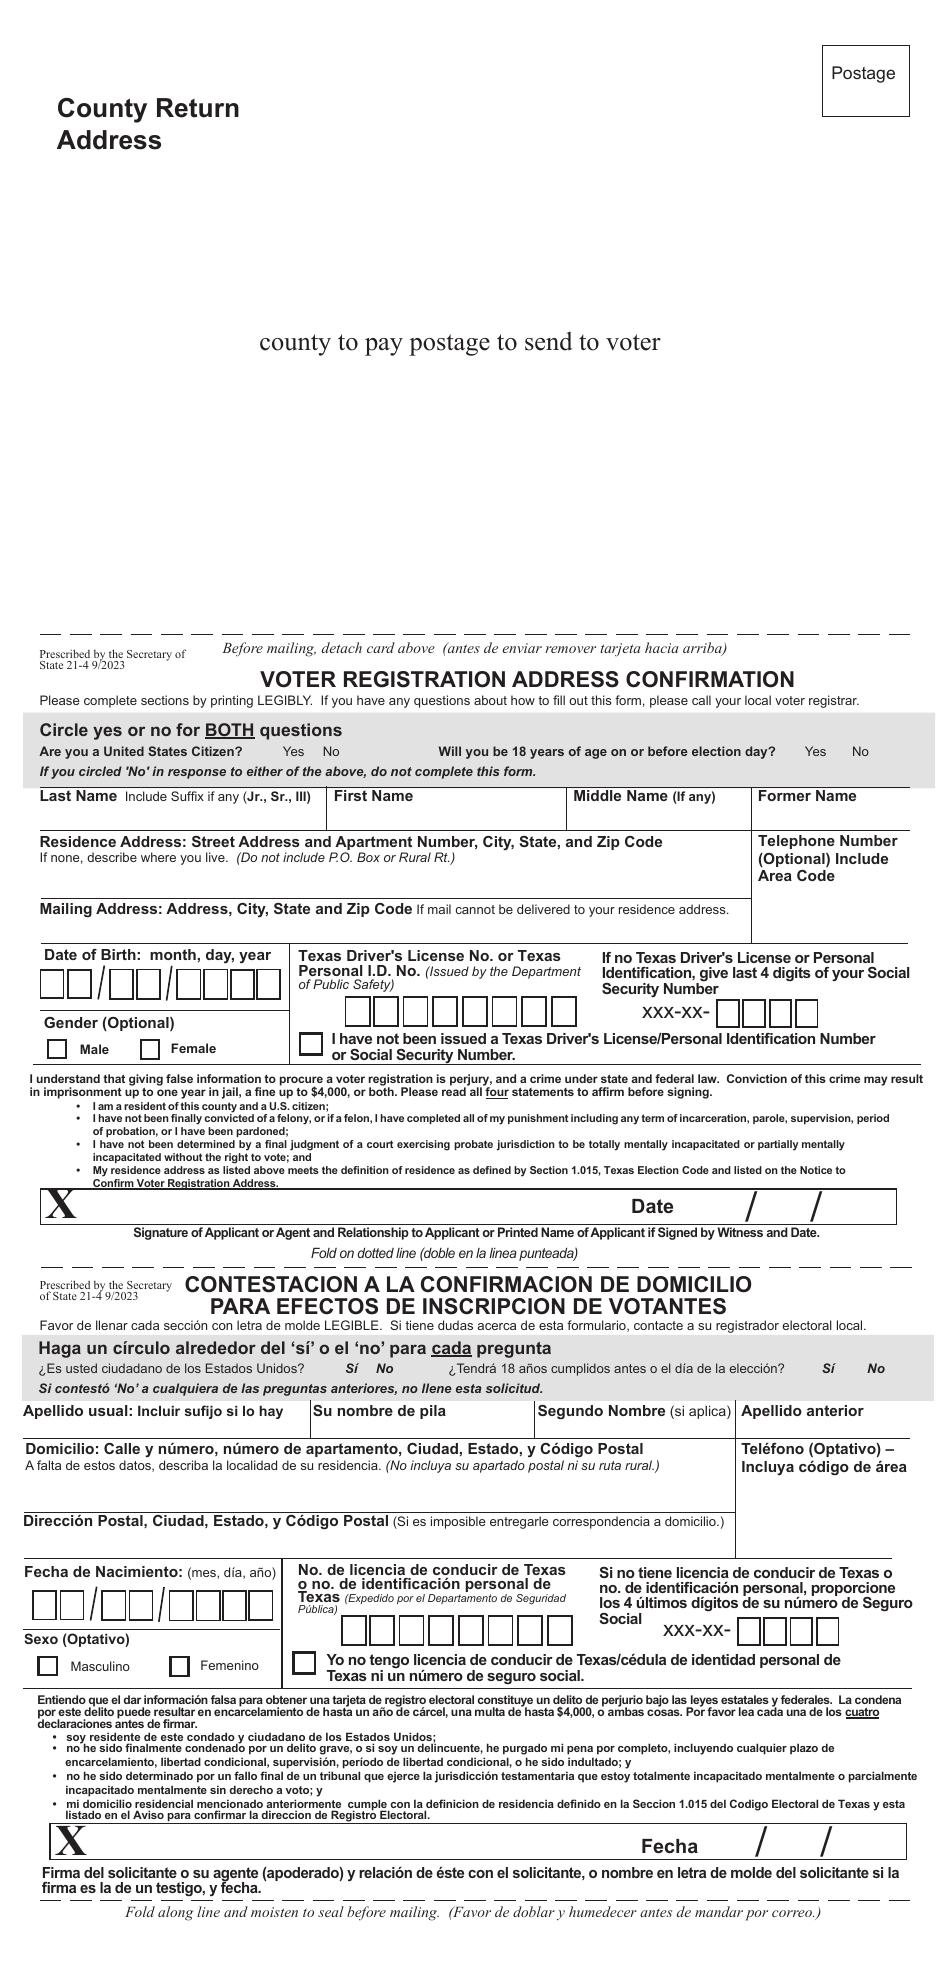 Form 21-4 Voter Registration Address Confirmation - Texas (English / Spanish), Page 1